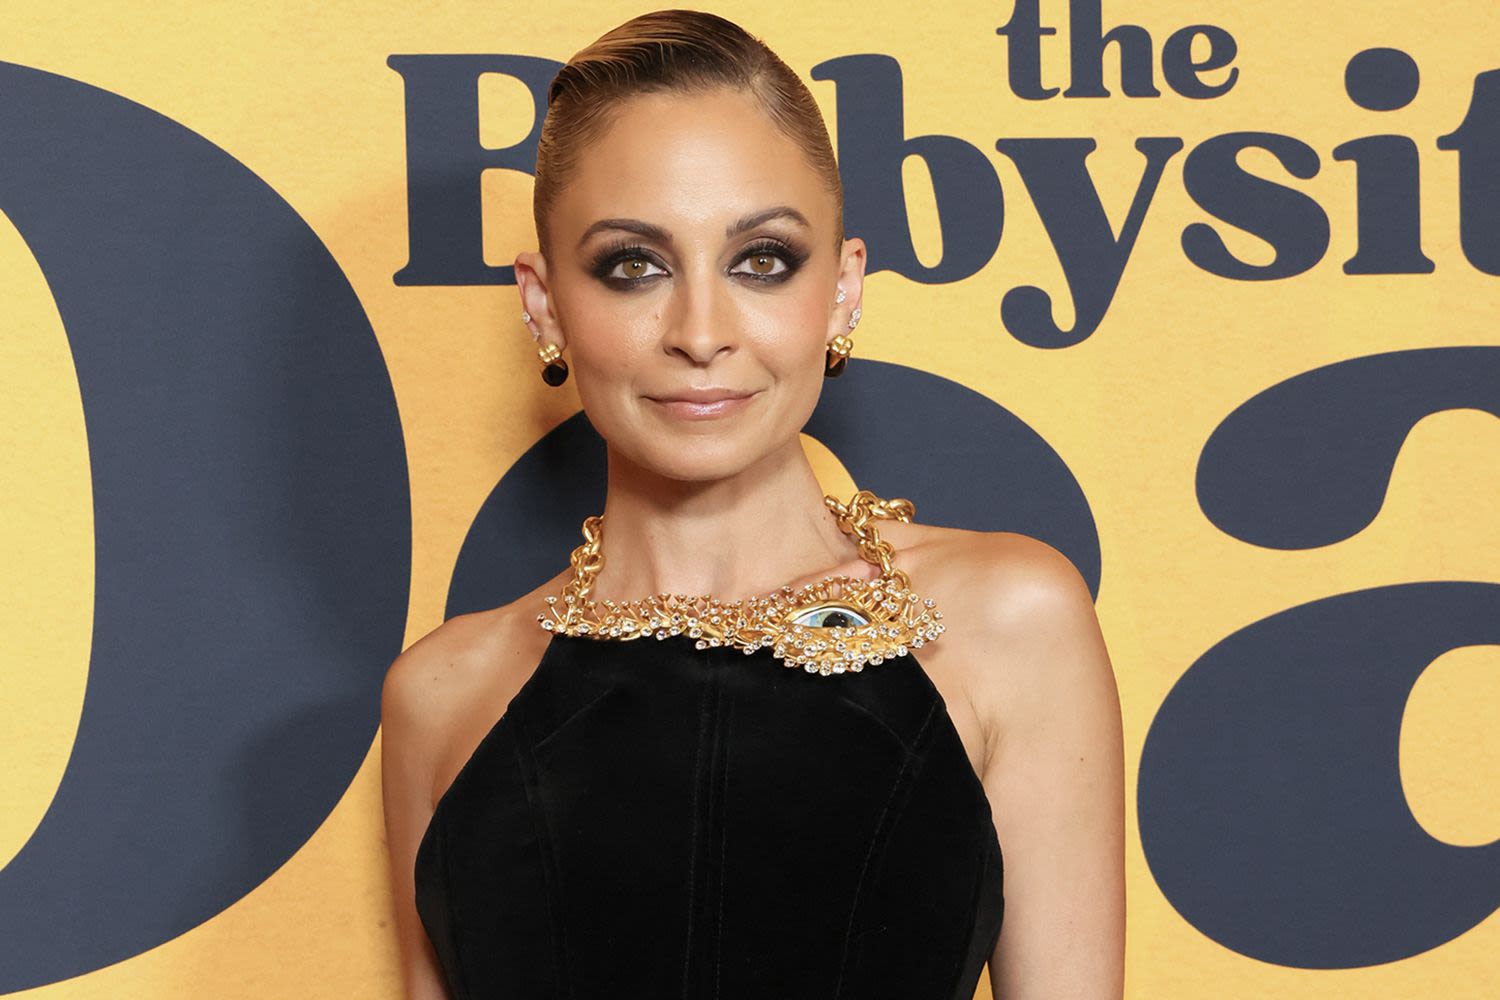 Nicole Richie Jokes Her Kids Don't Care About Her Show with Paris Hilton: ‘Drive Me to Sephora?’ (Exclusive)